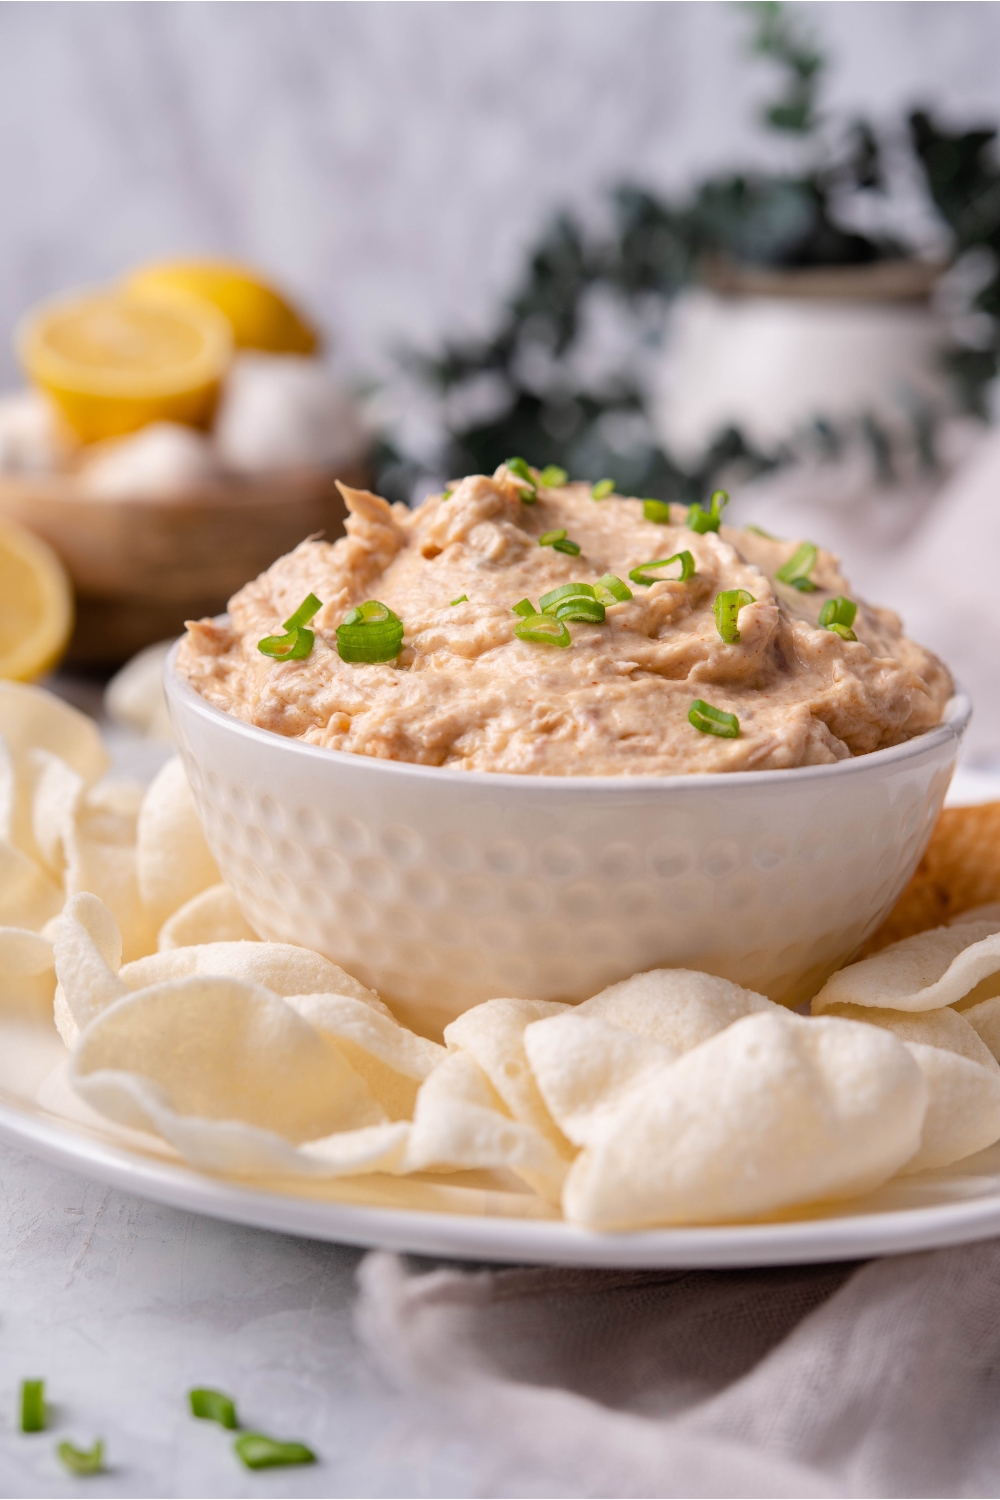 Smoked tuna dip in a white serving bowl garnished with chopped green onions. The bowl of dip is on a white plate and surrounded by chips.